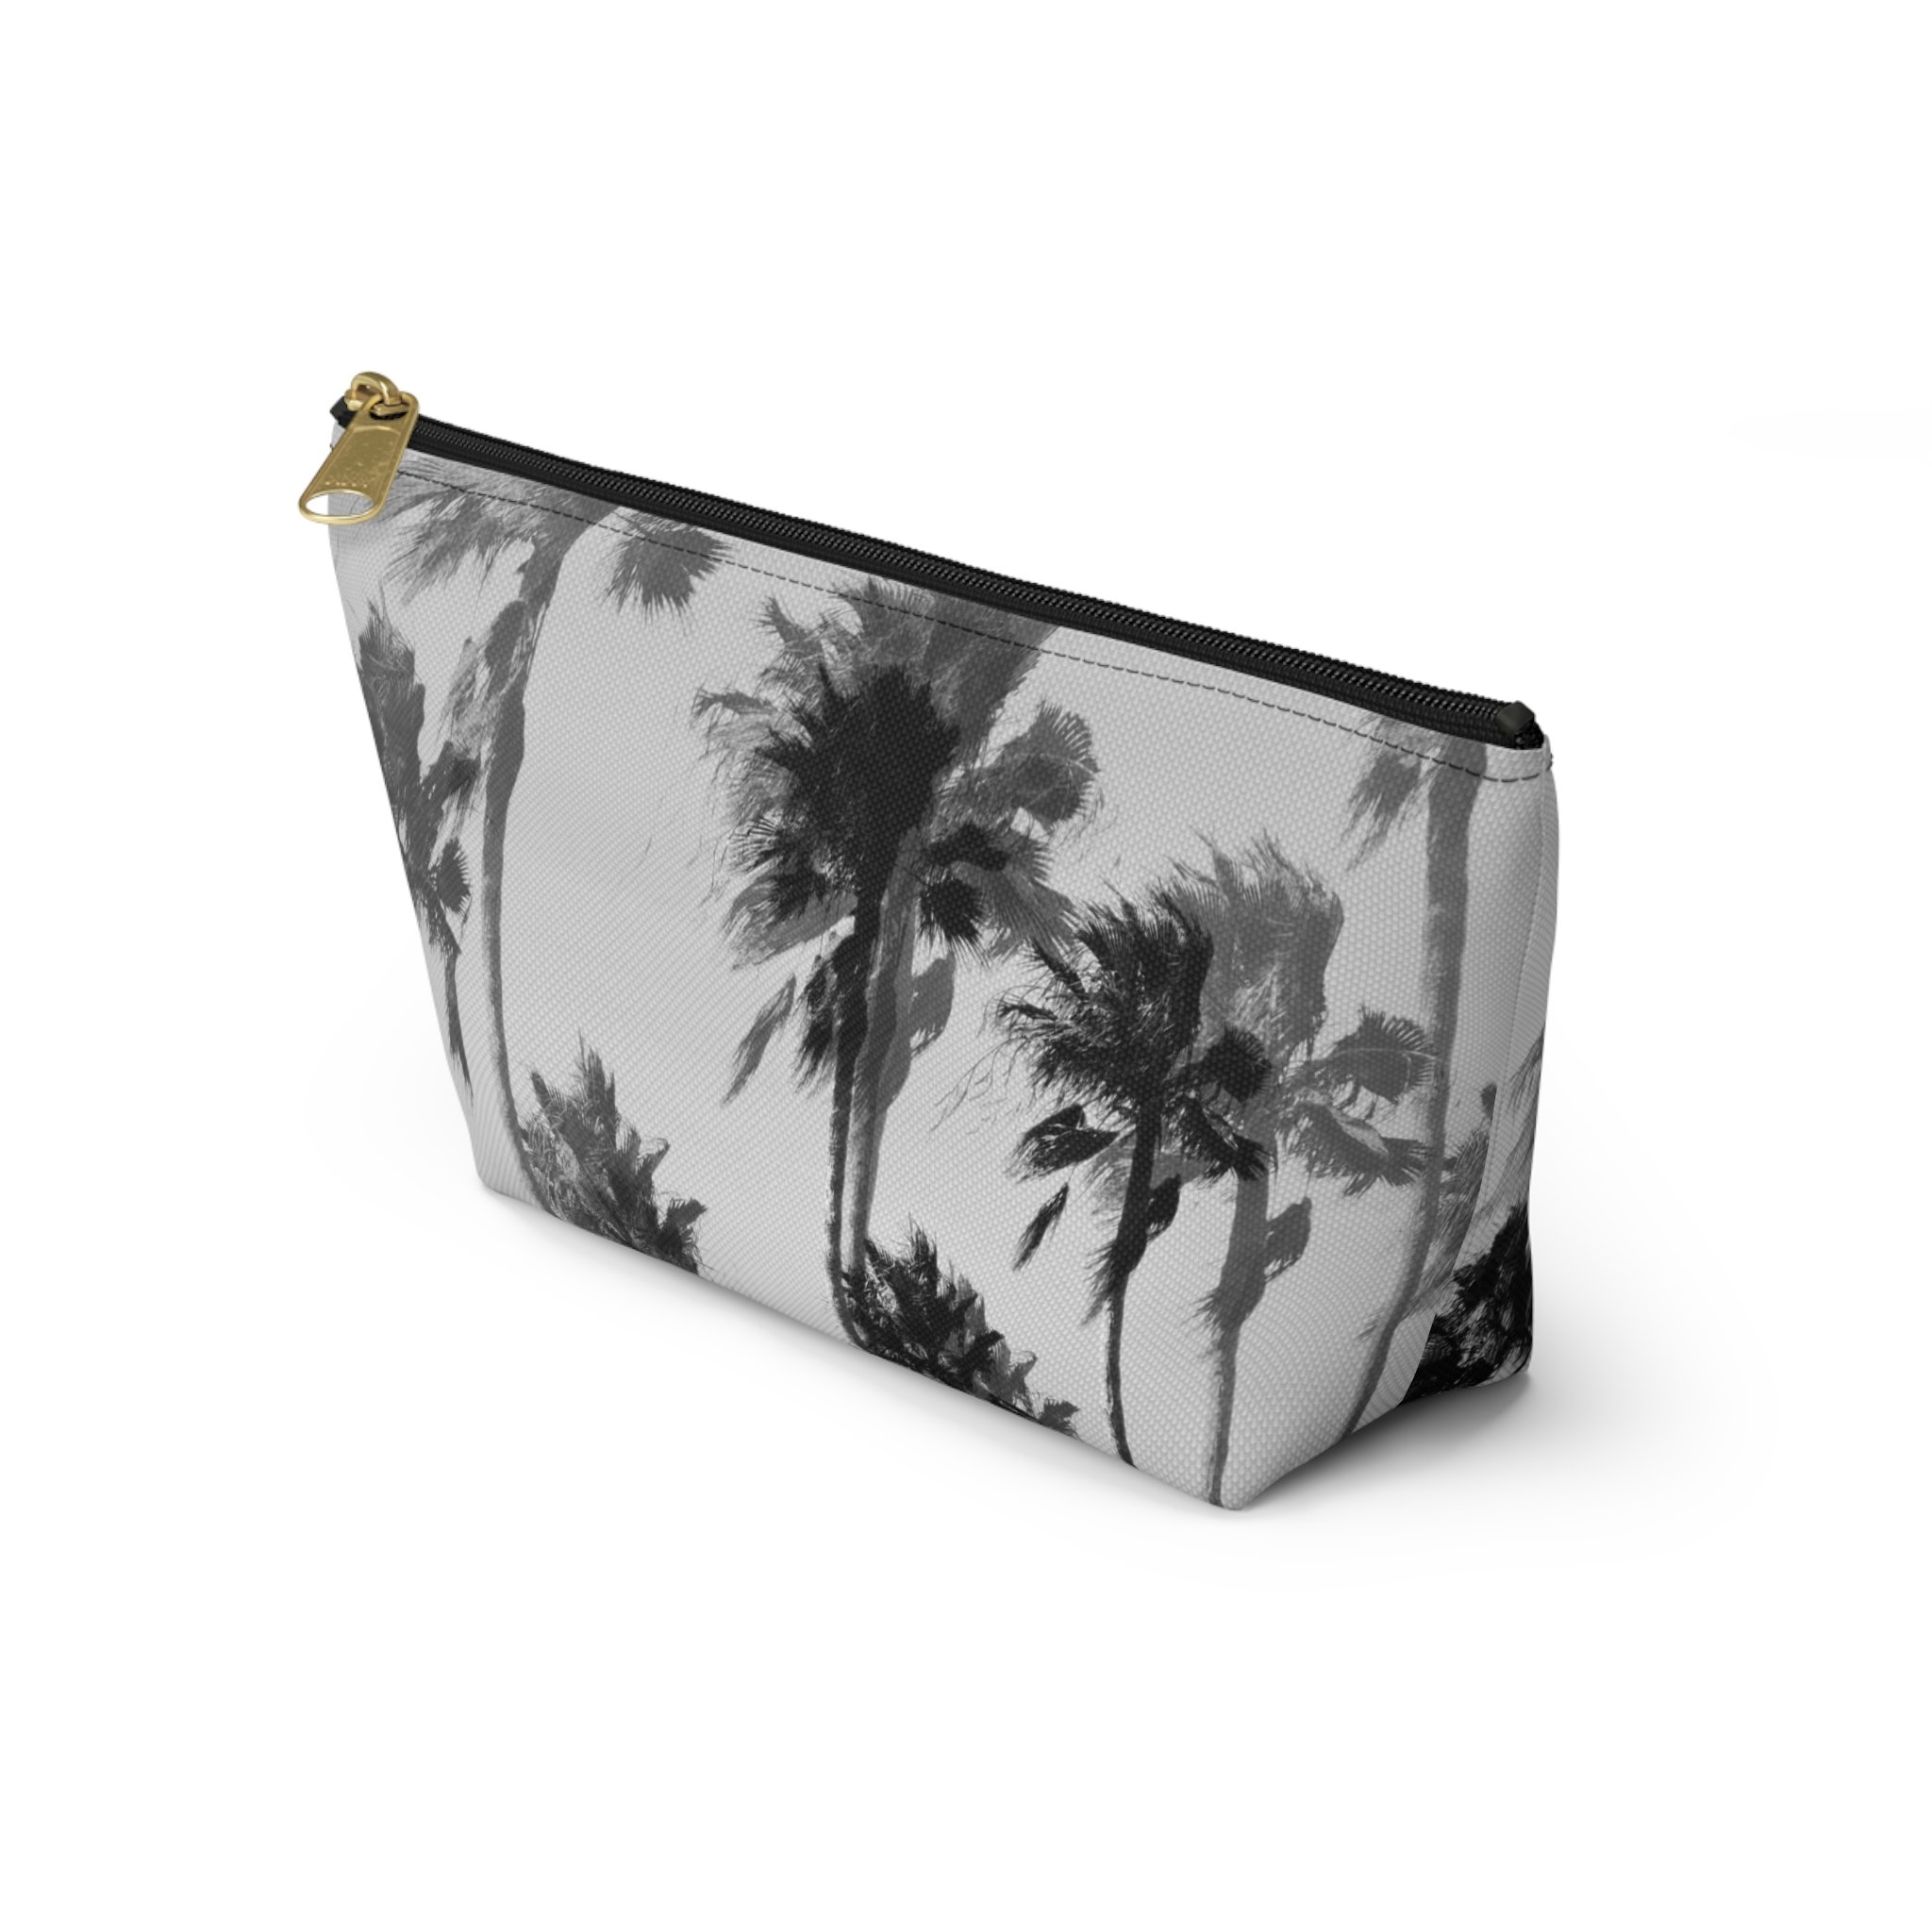 Gainsboro Palms - Carry-All Pouch — Beach Surf Decor by Nature | City Co.